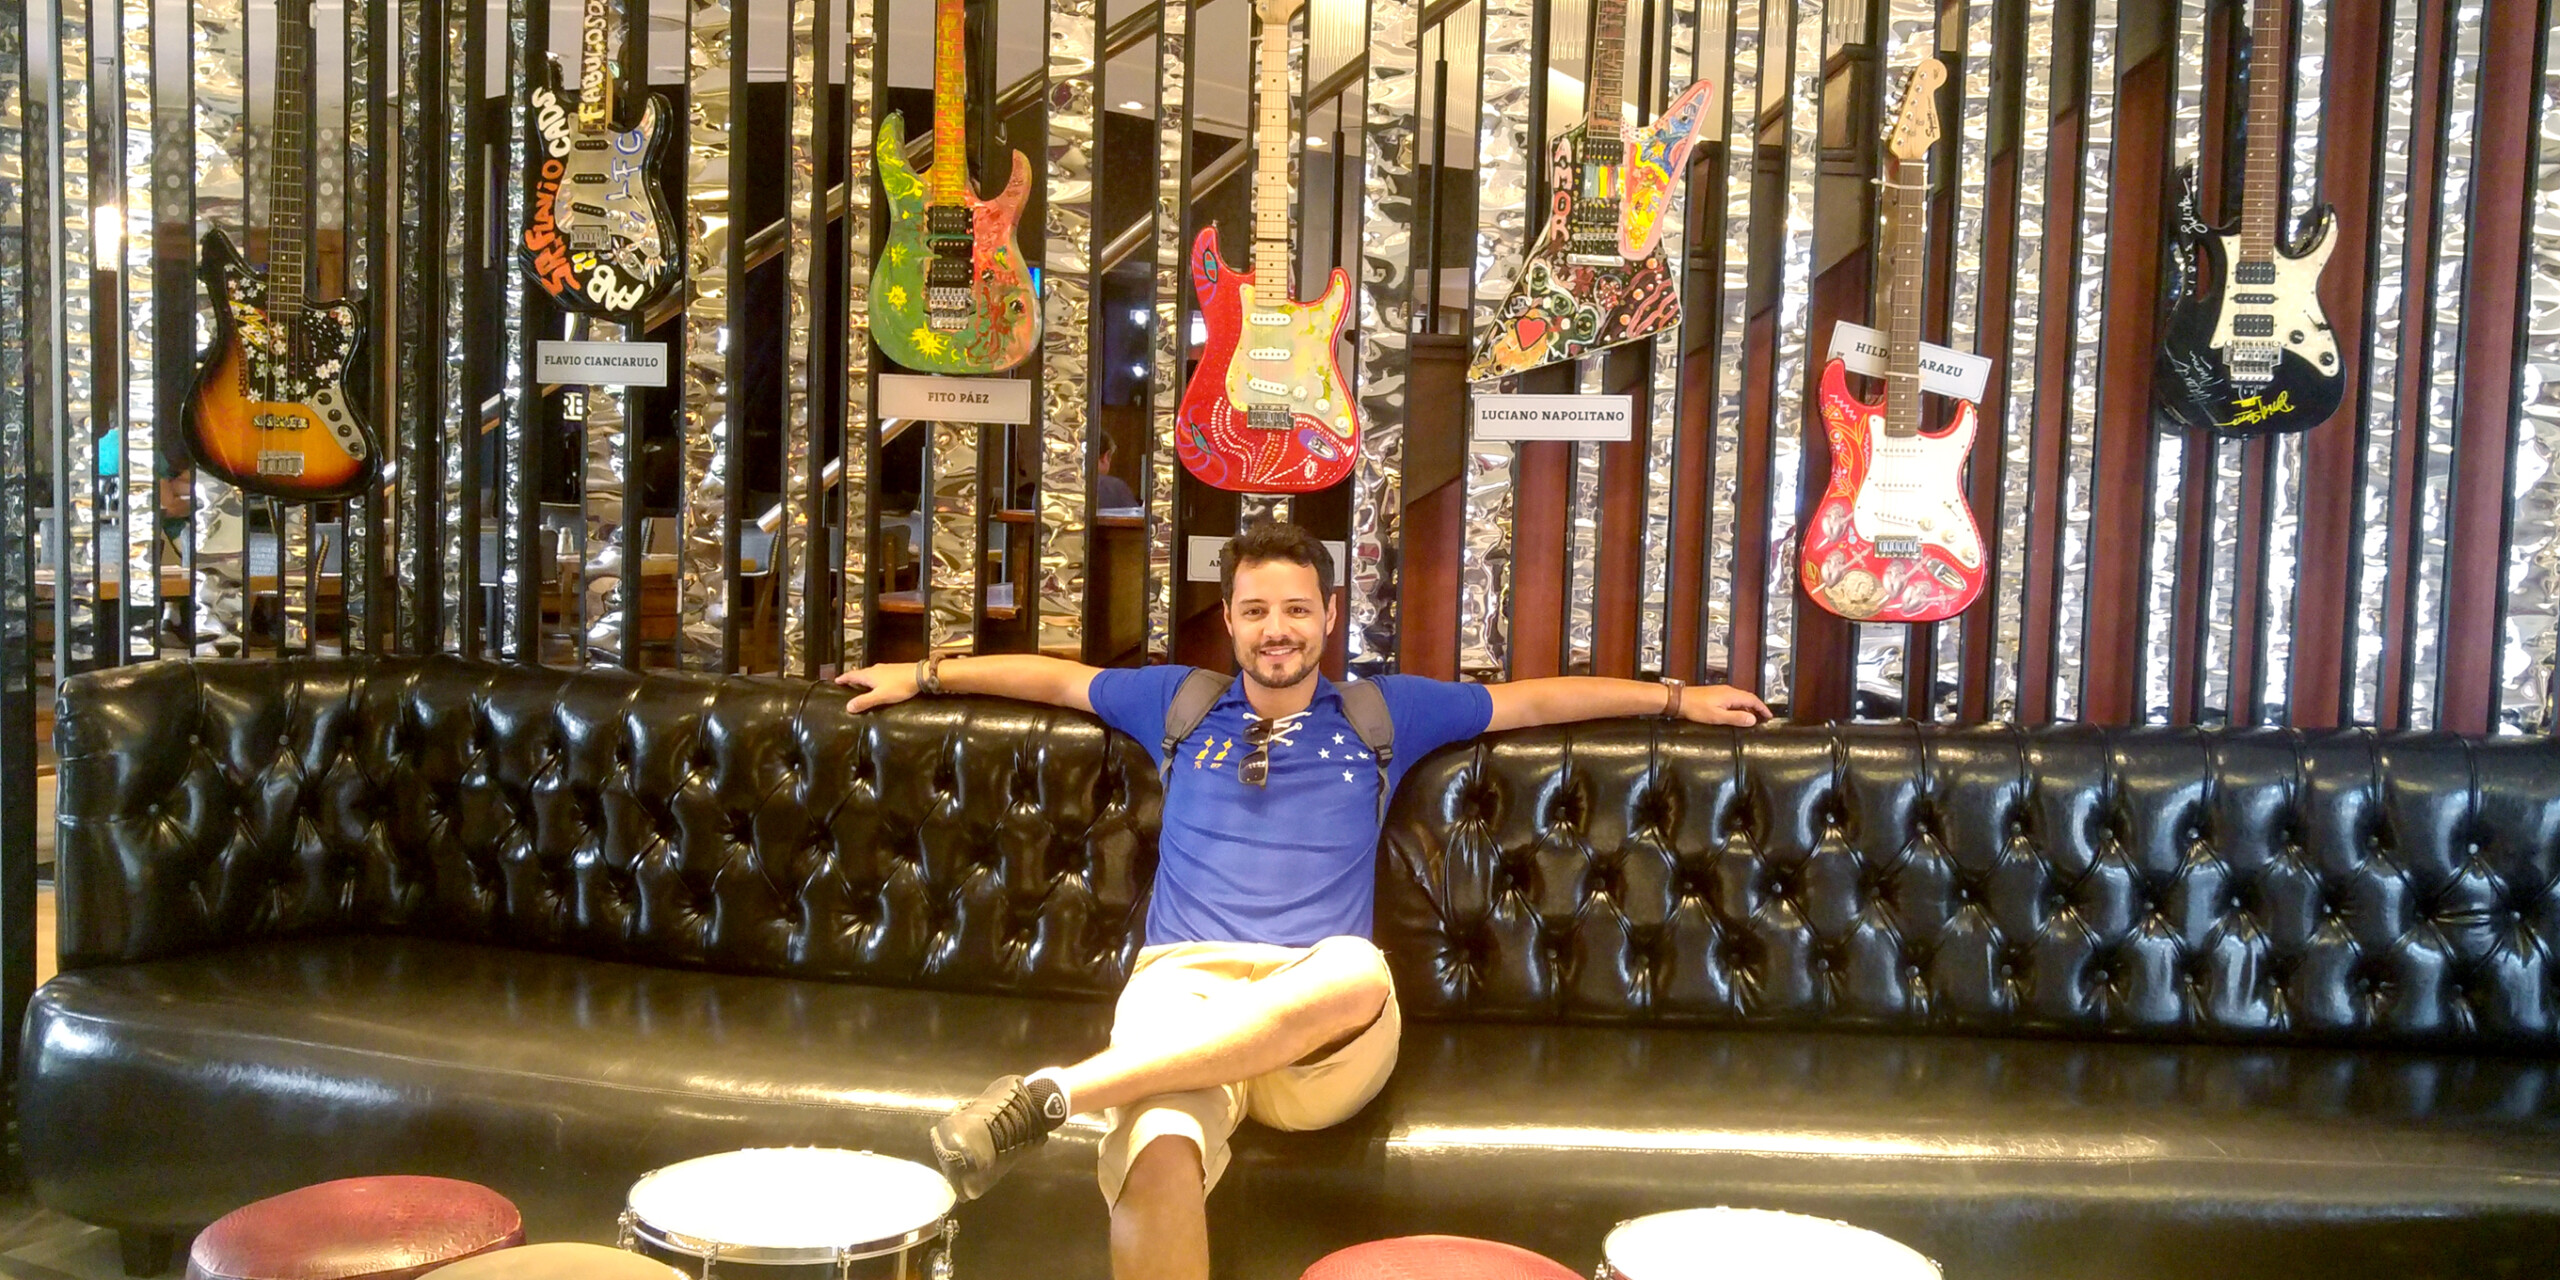 Hard Rock Cafe Buenos Aires